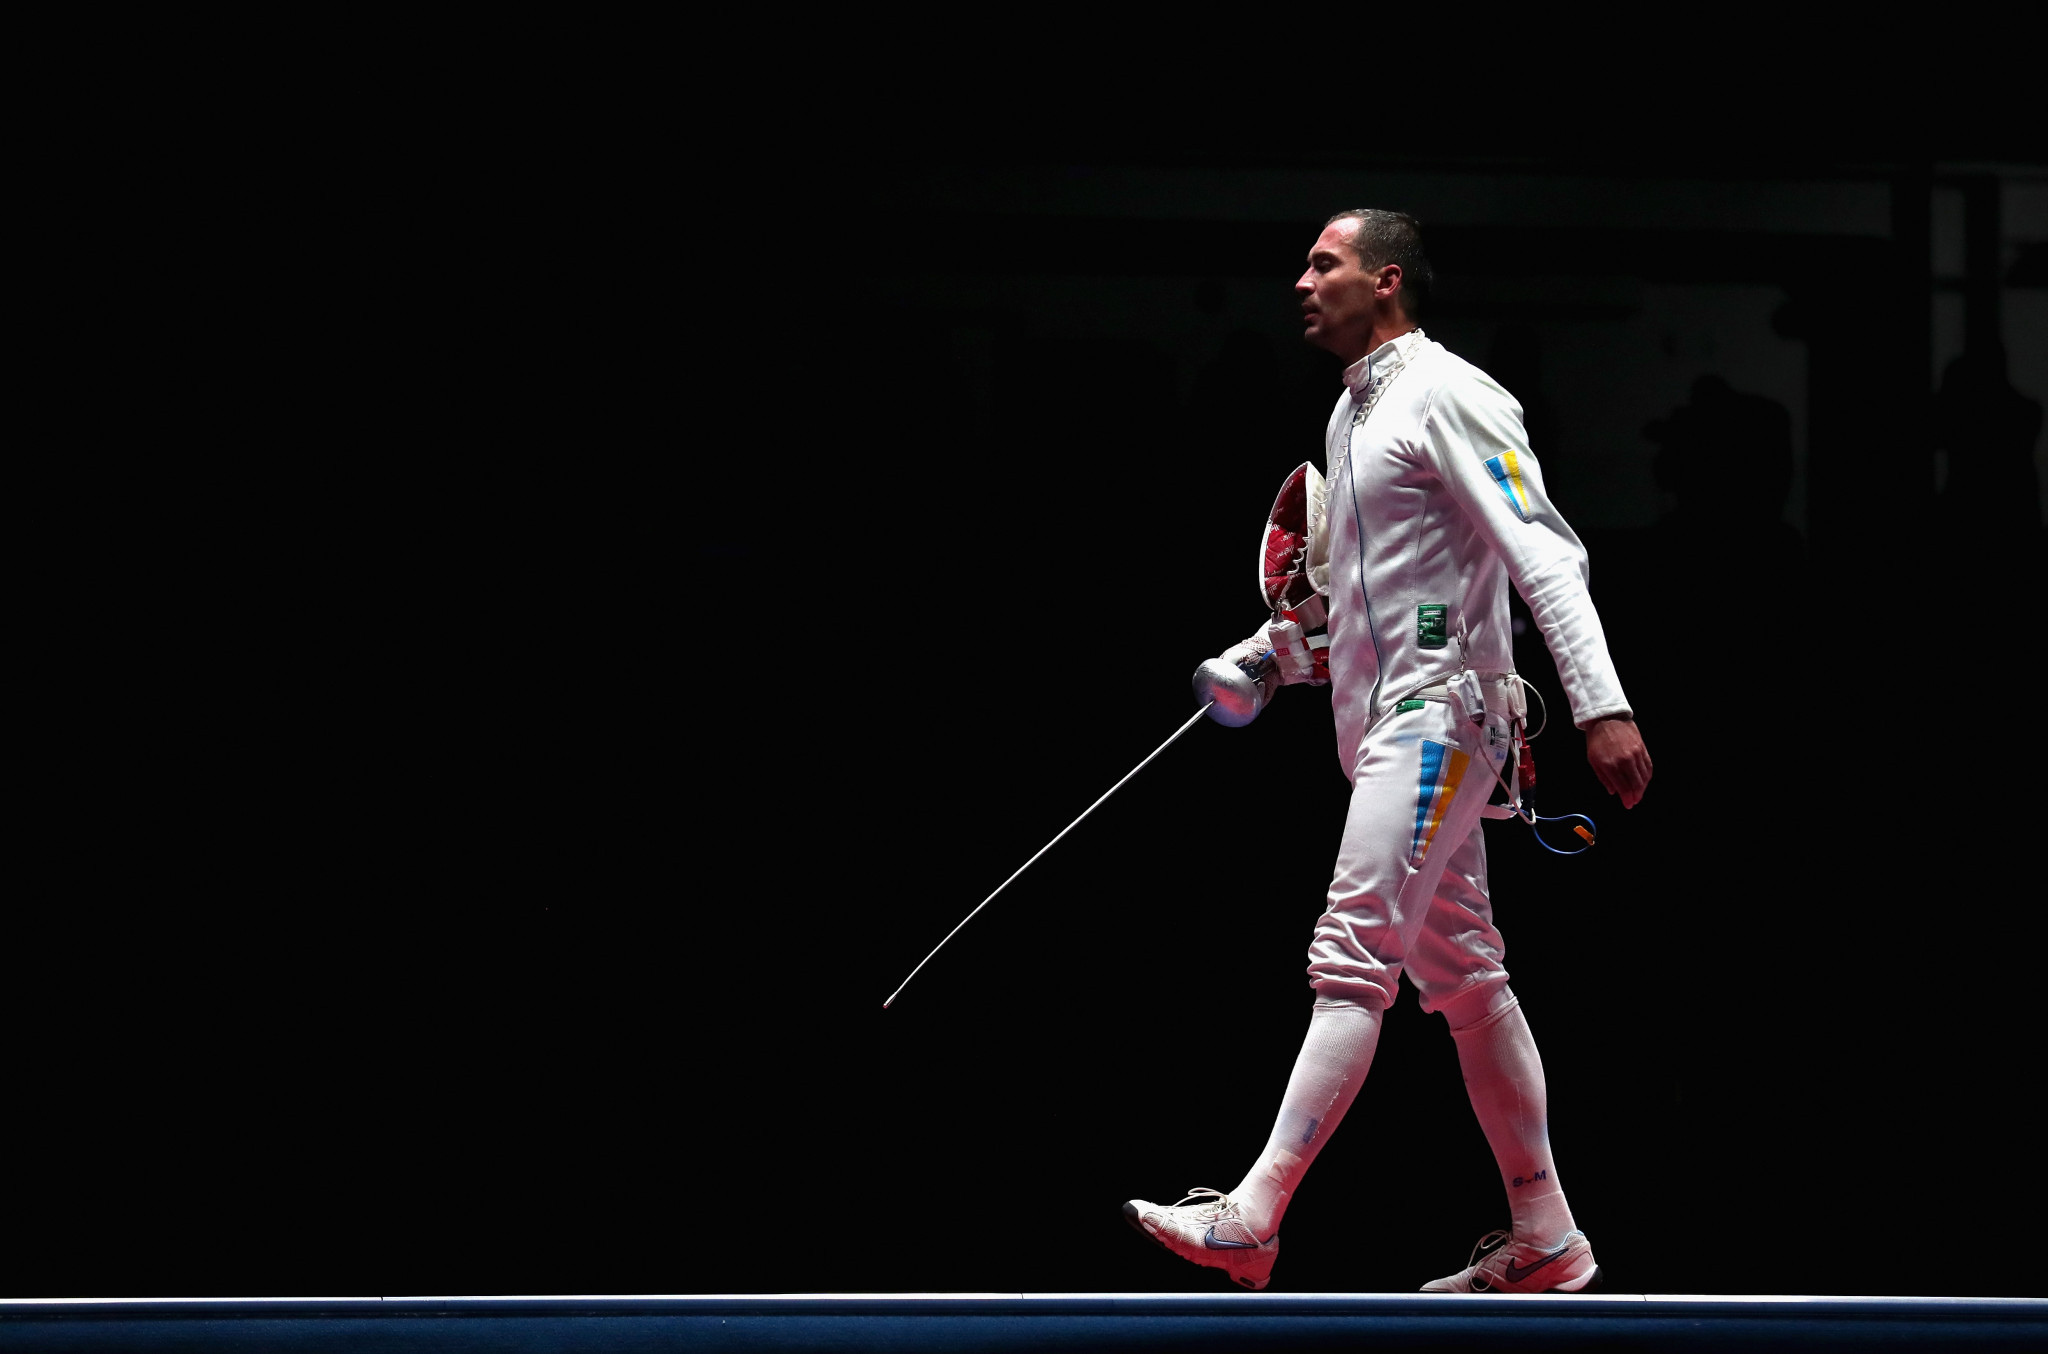 Quartet of FIE World Cups set to begin with leading épée and sabre athletes seeking success